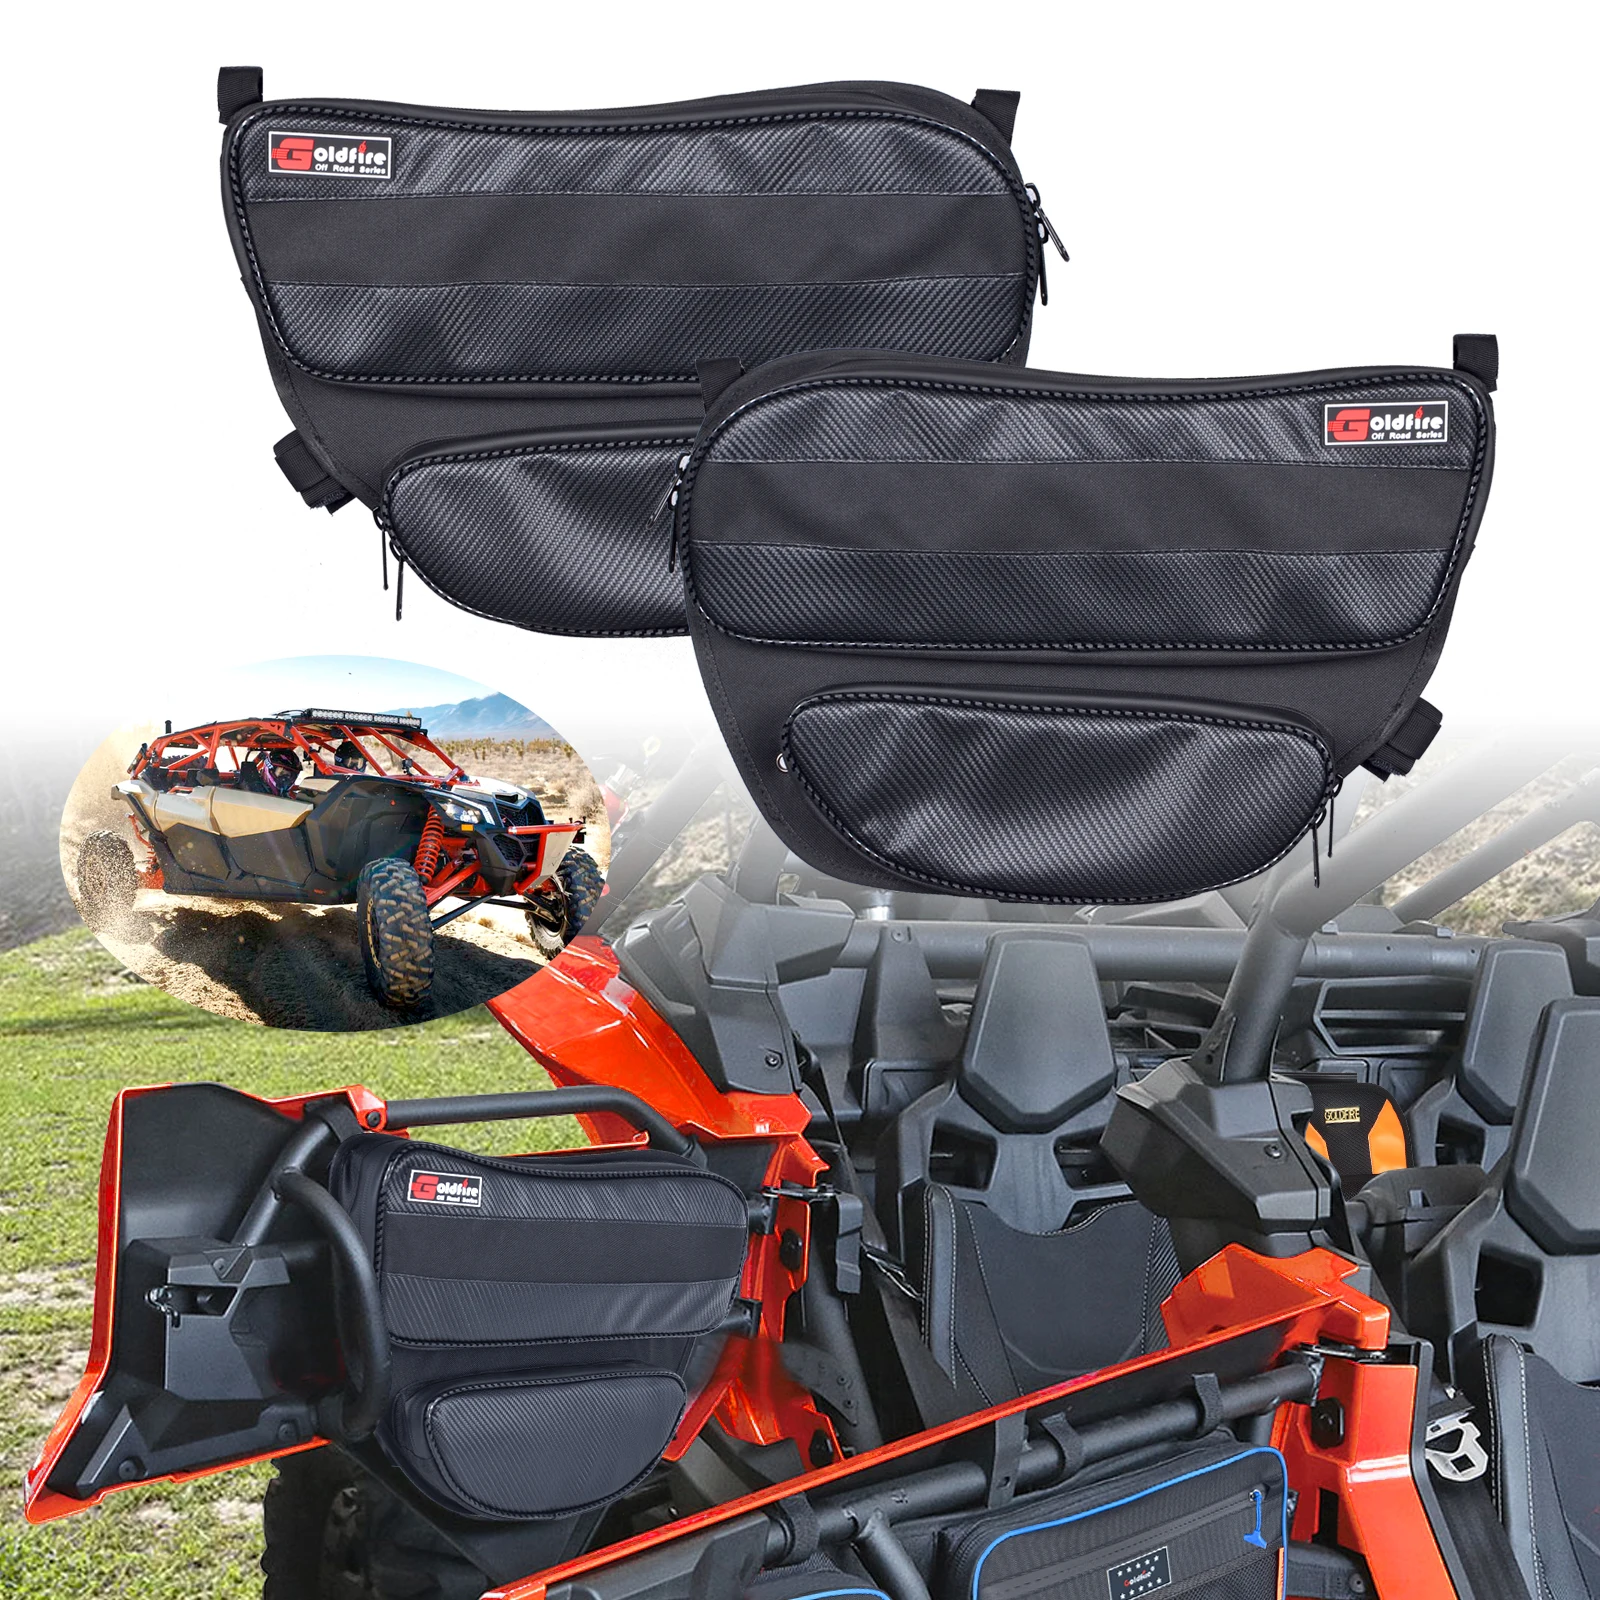 Maverick X3 Accessories Waterproof Rear Door Bags For 2017-2021 Can Am Maverick X3 Max Turbo R Passenger and Driver Side Bag